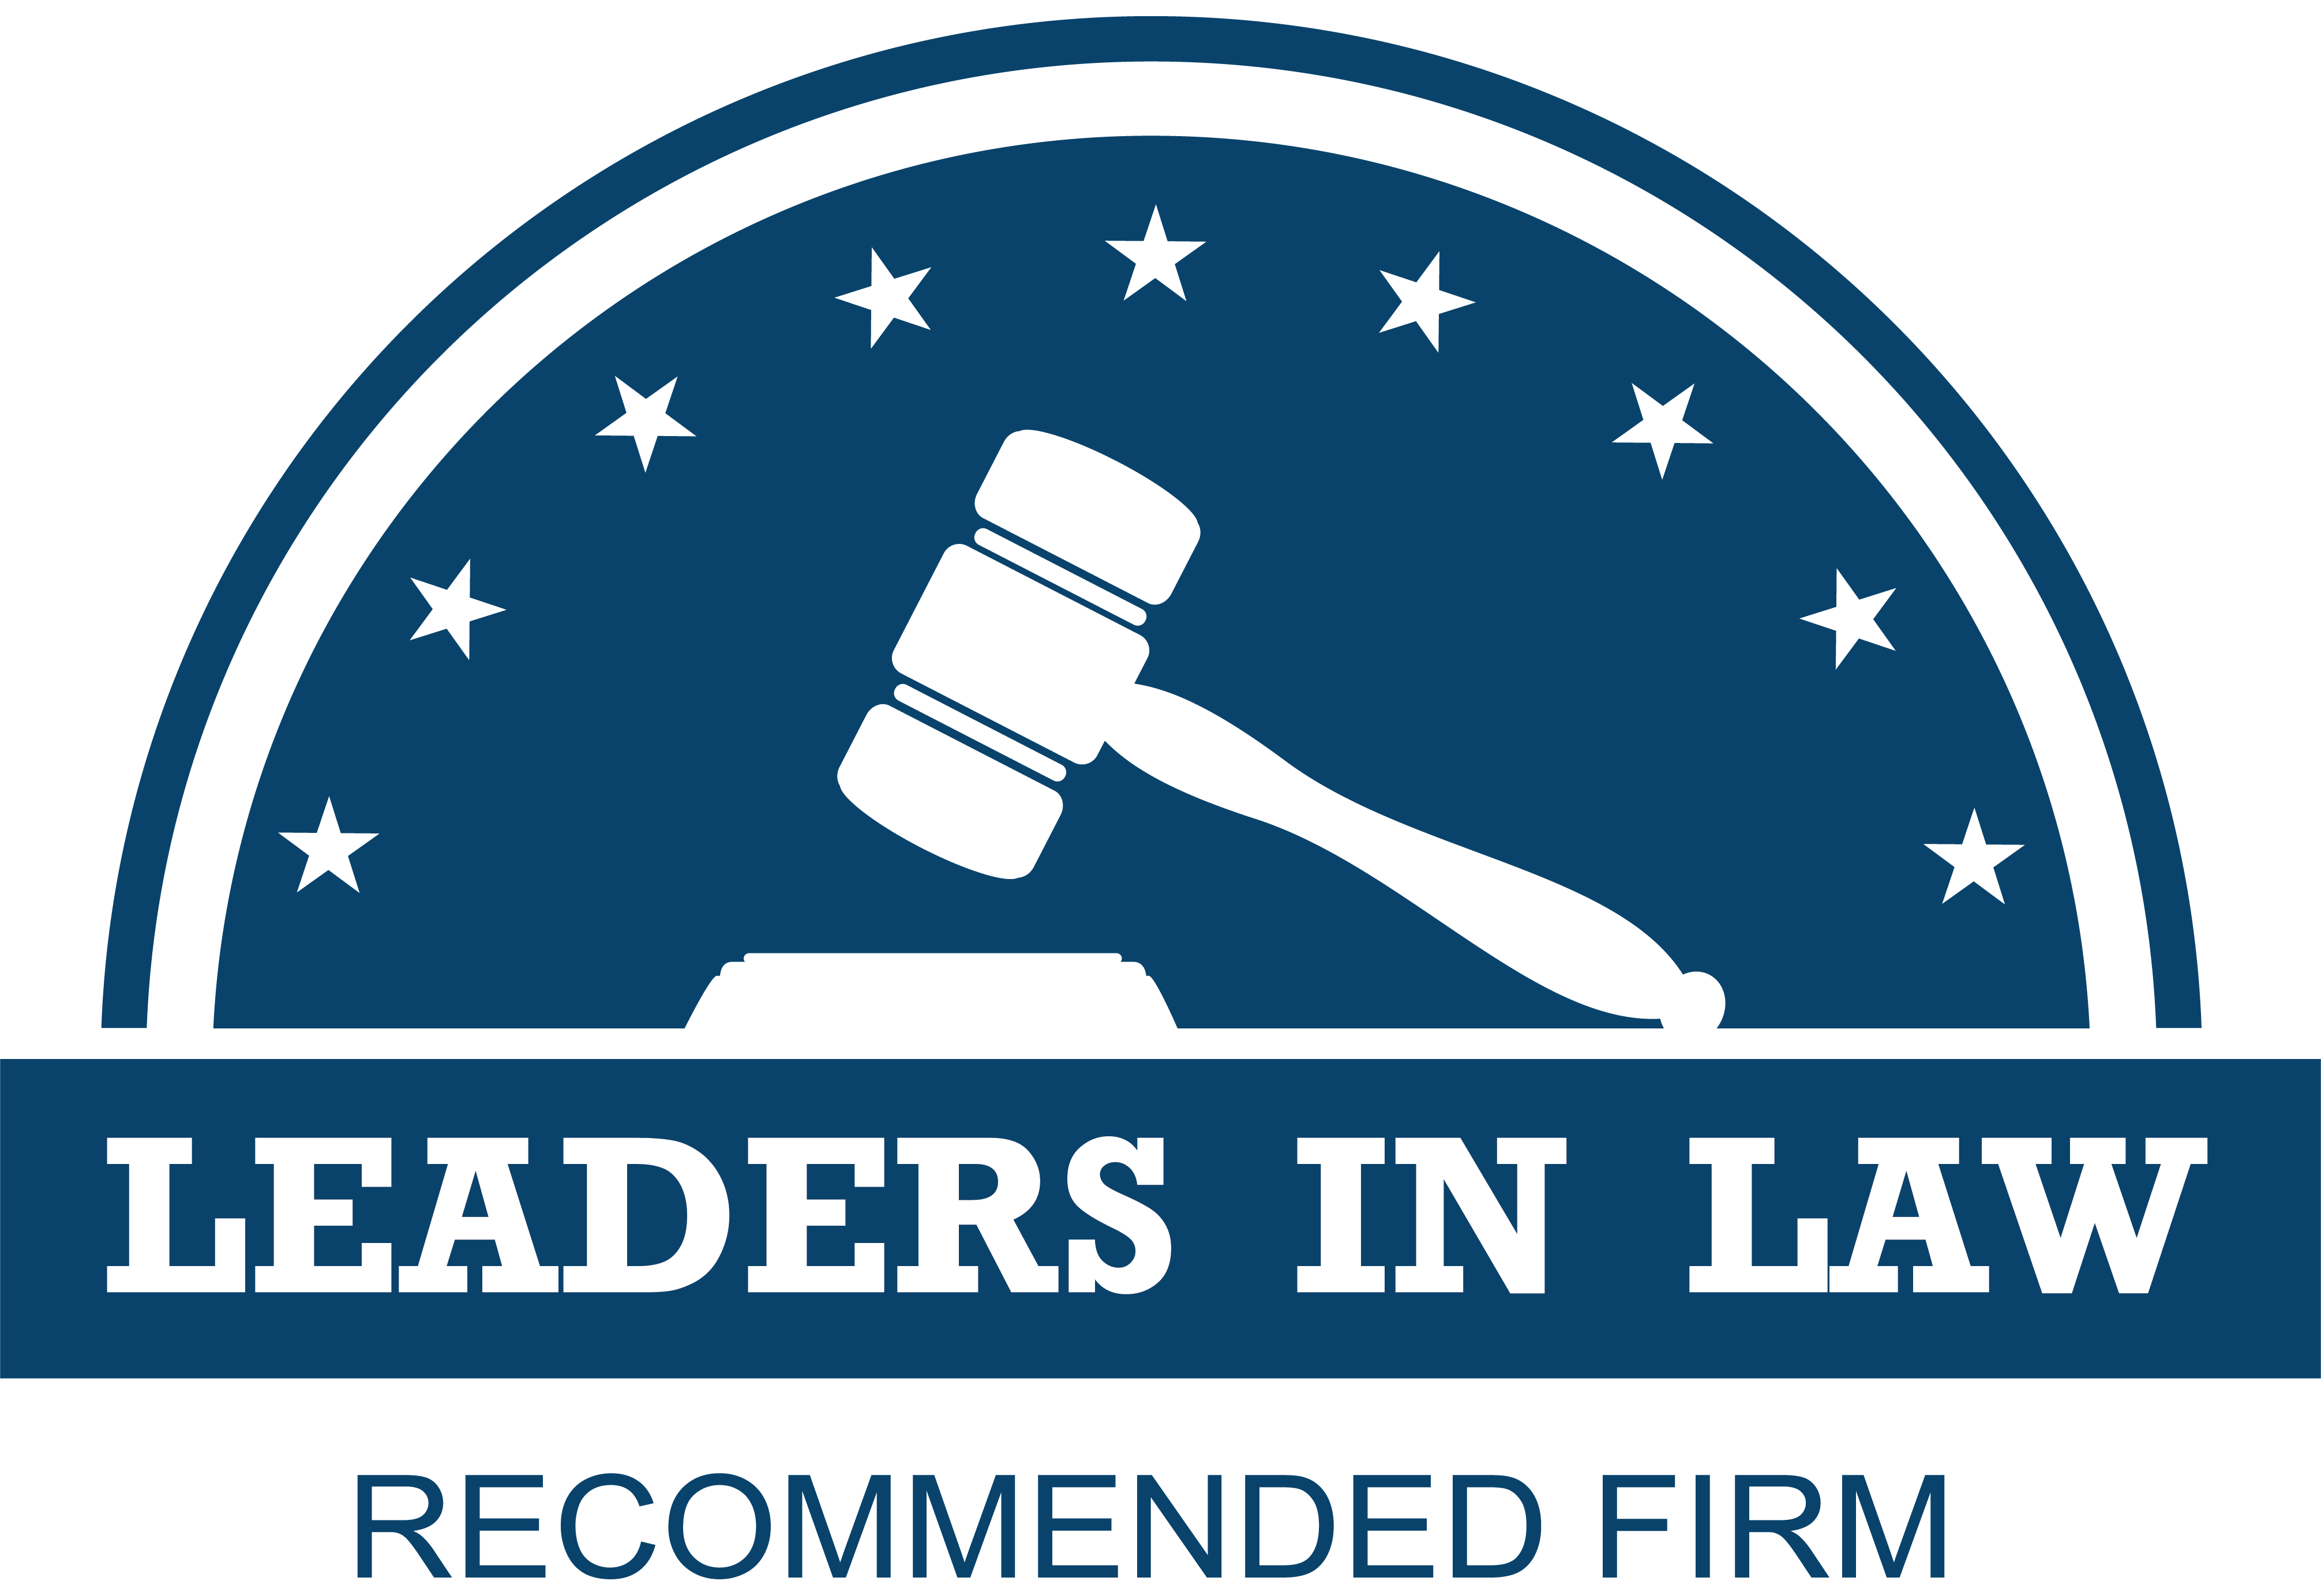 Alexandra is a member of Leaders in Law and grateful winner of their Global Private Equity Expert Award